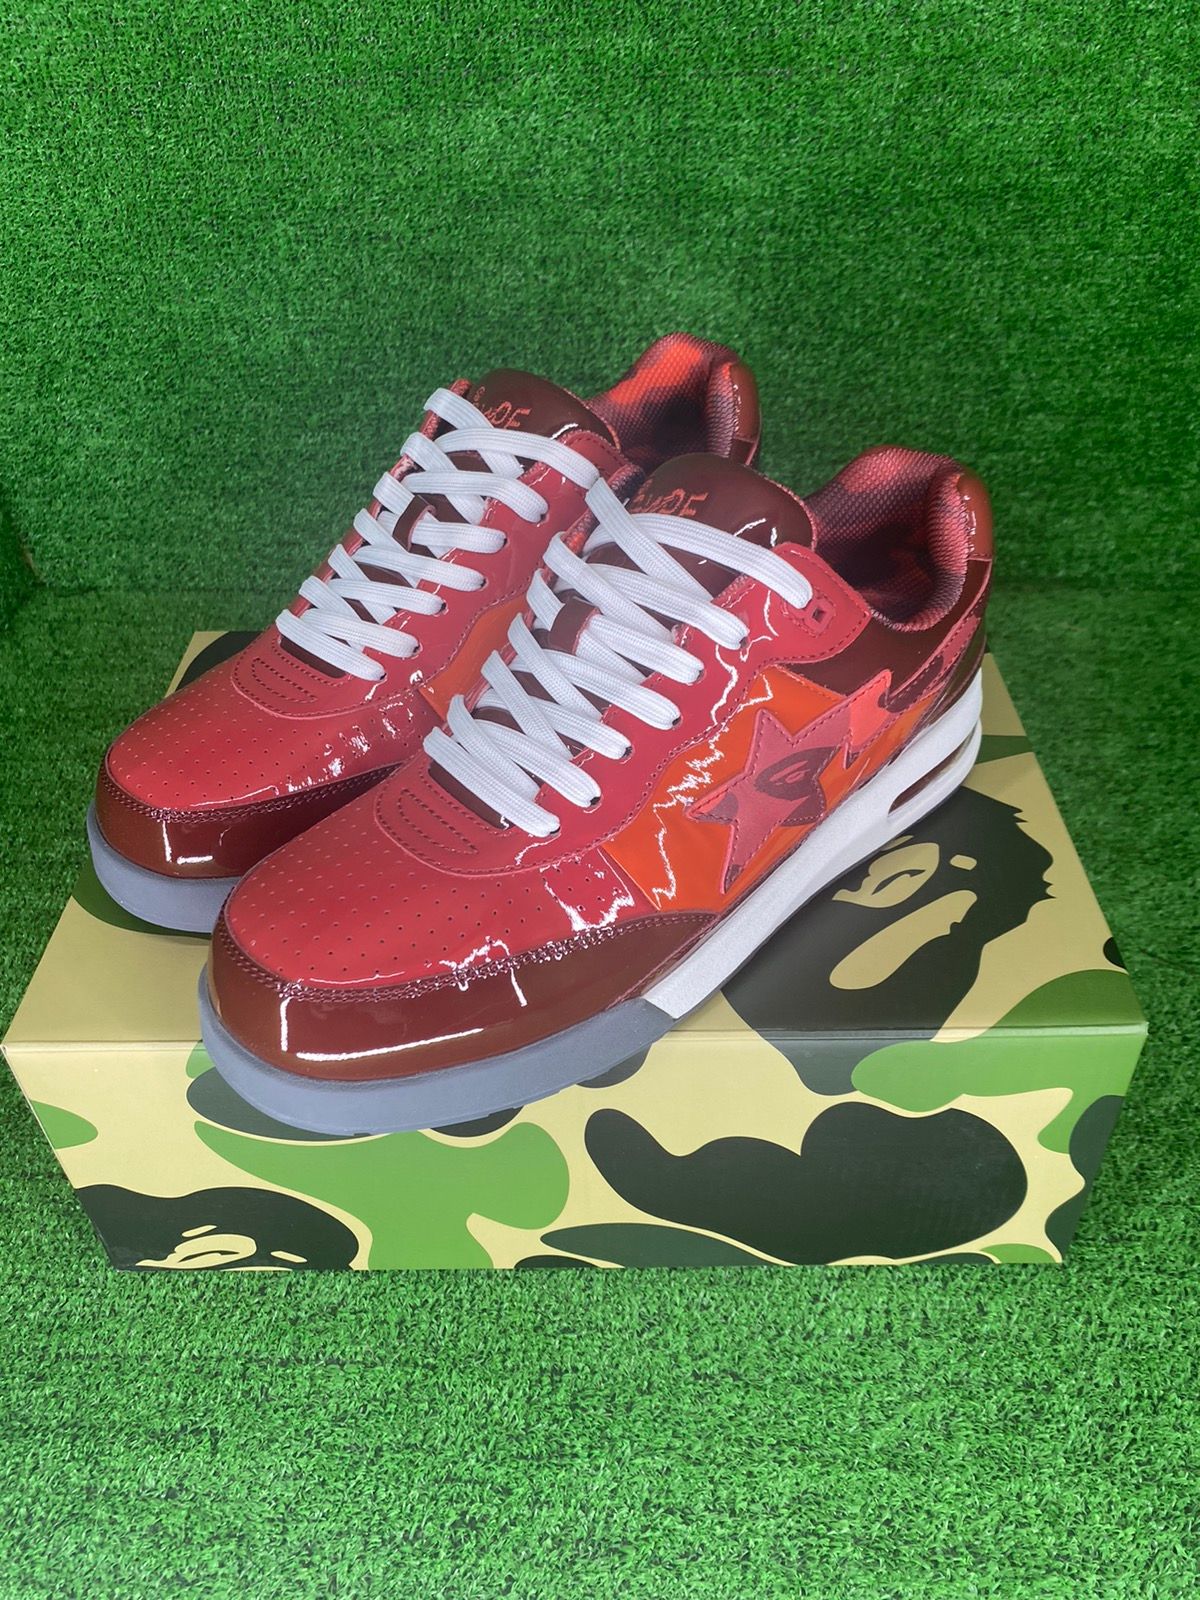 Pre-owned Bape B Road Sta 1 Patent Leather Red Size 11 Shoes In Red Camo